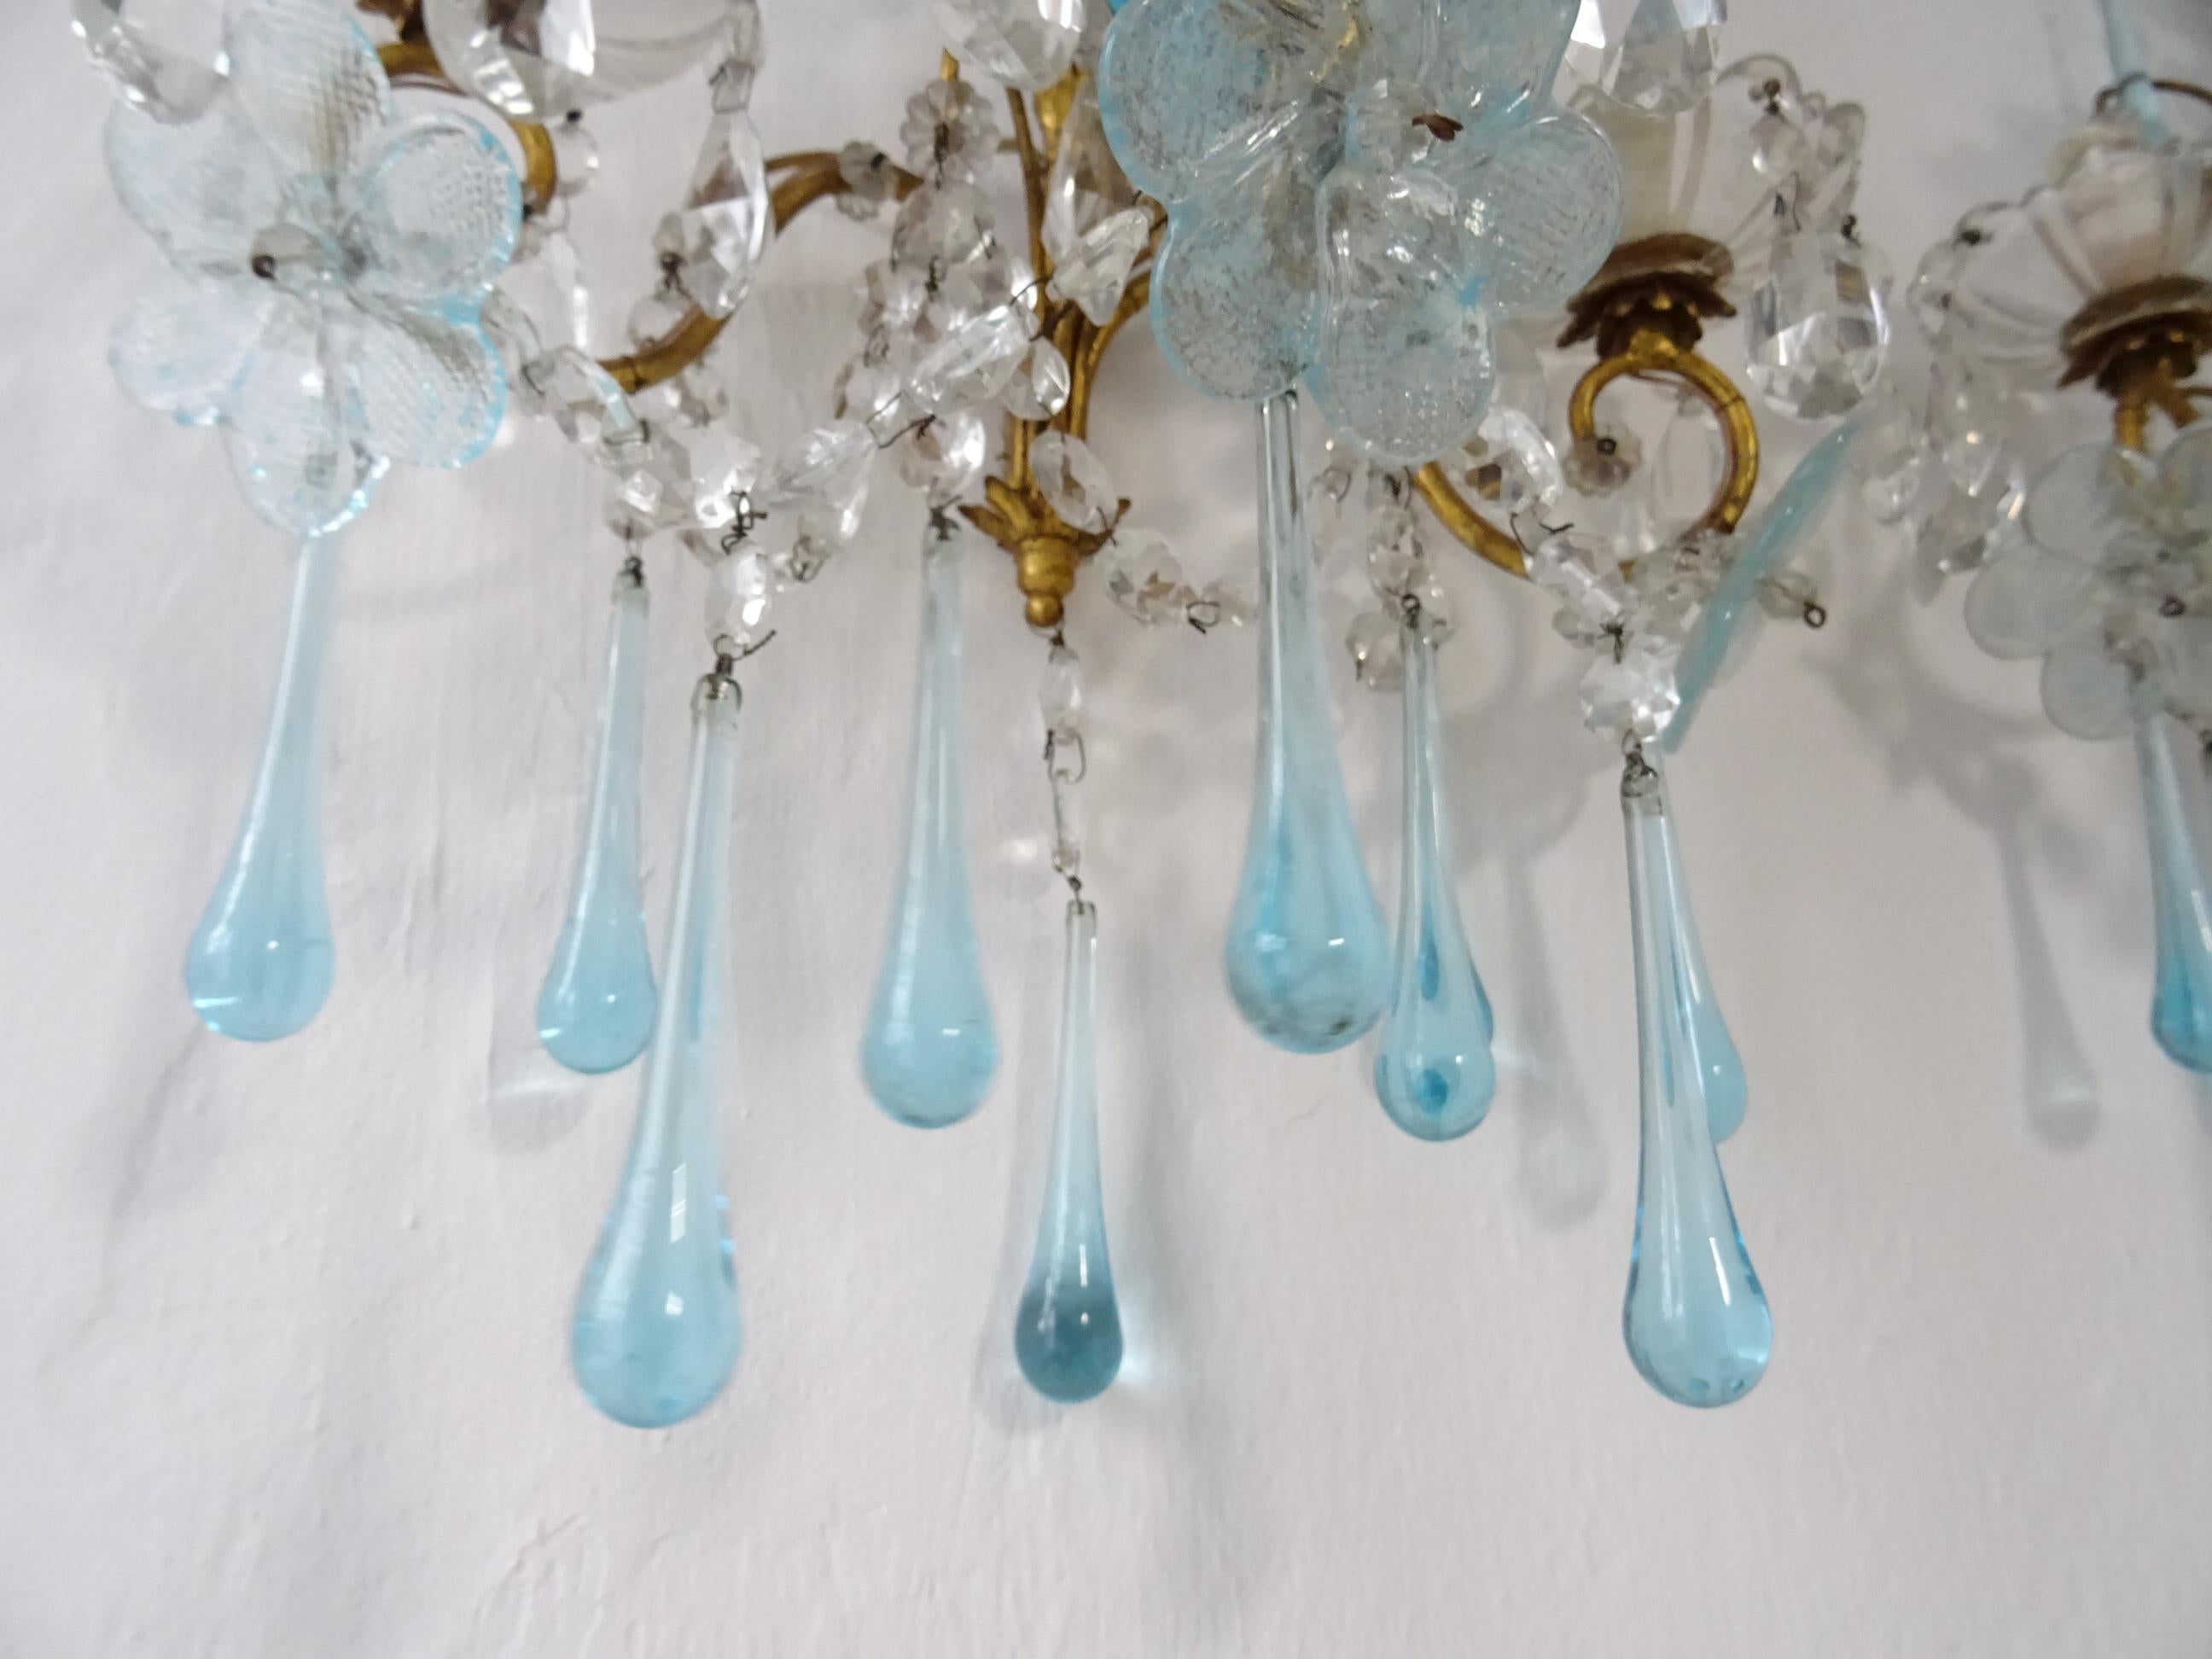 1920 French Aqua Blue Murano Flowers Drops and Crystal Prisms Spears Sconces Big 3